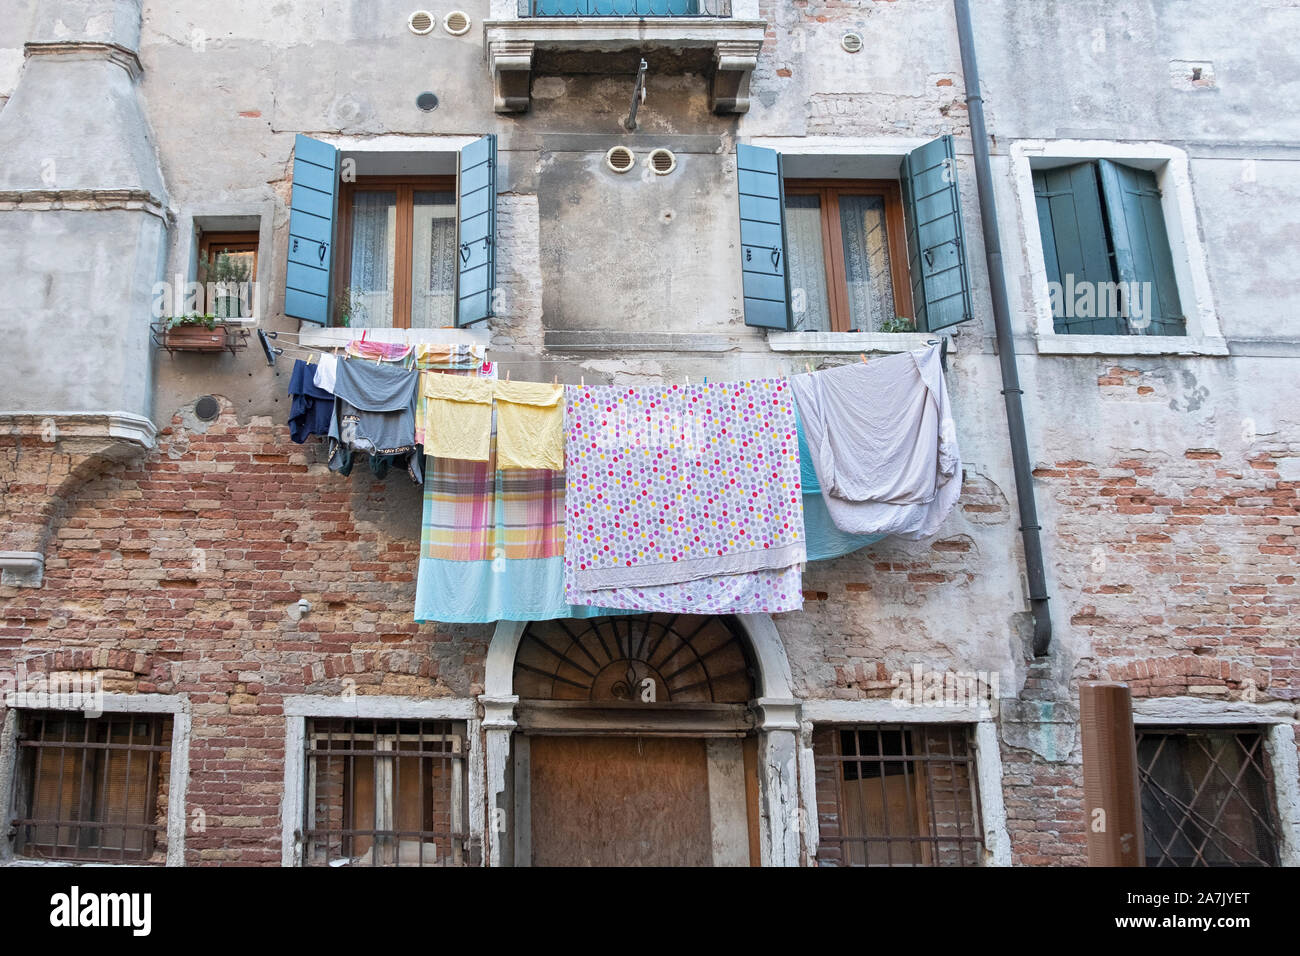 Laundry hanging to dry on the side of a 16th century building on a side street bordering a canal near Campo San Provolo Castello in Venice, Italy. Stock Photo